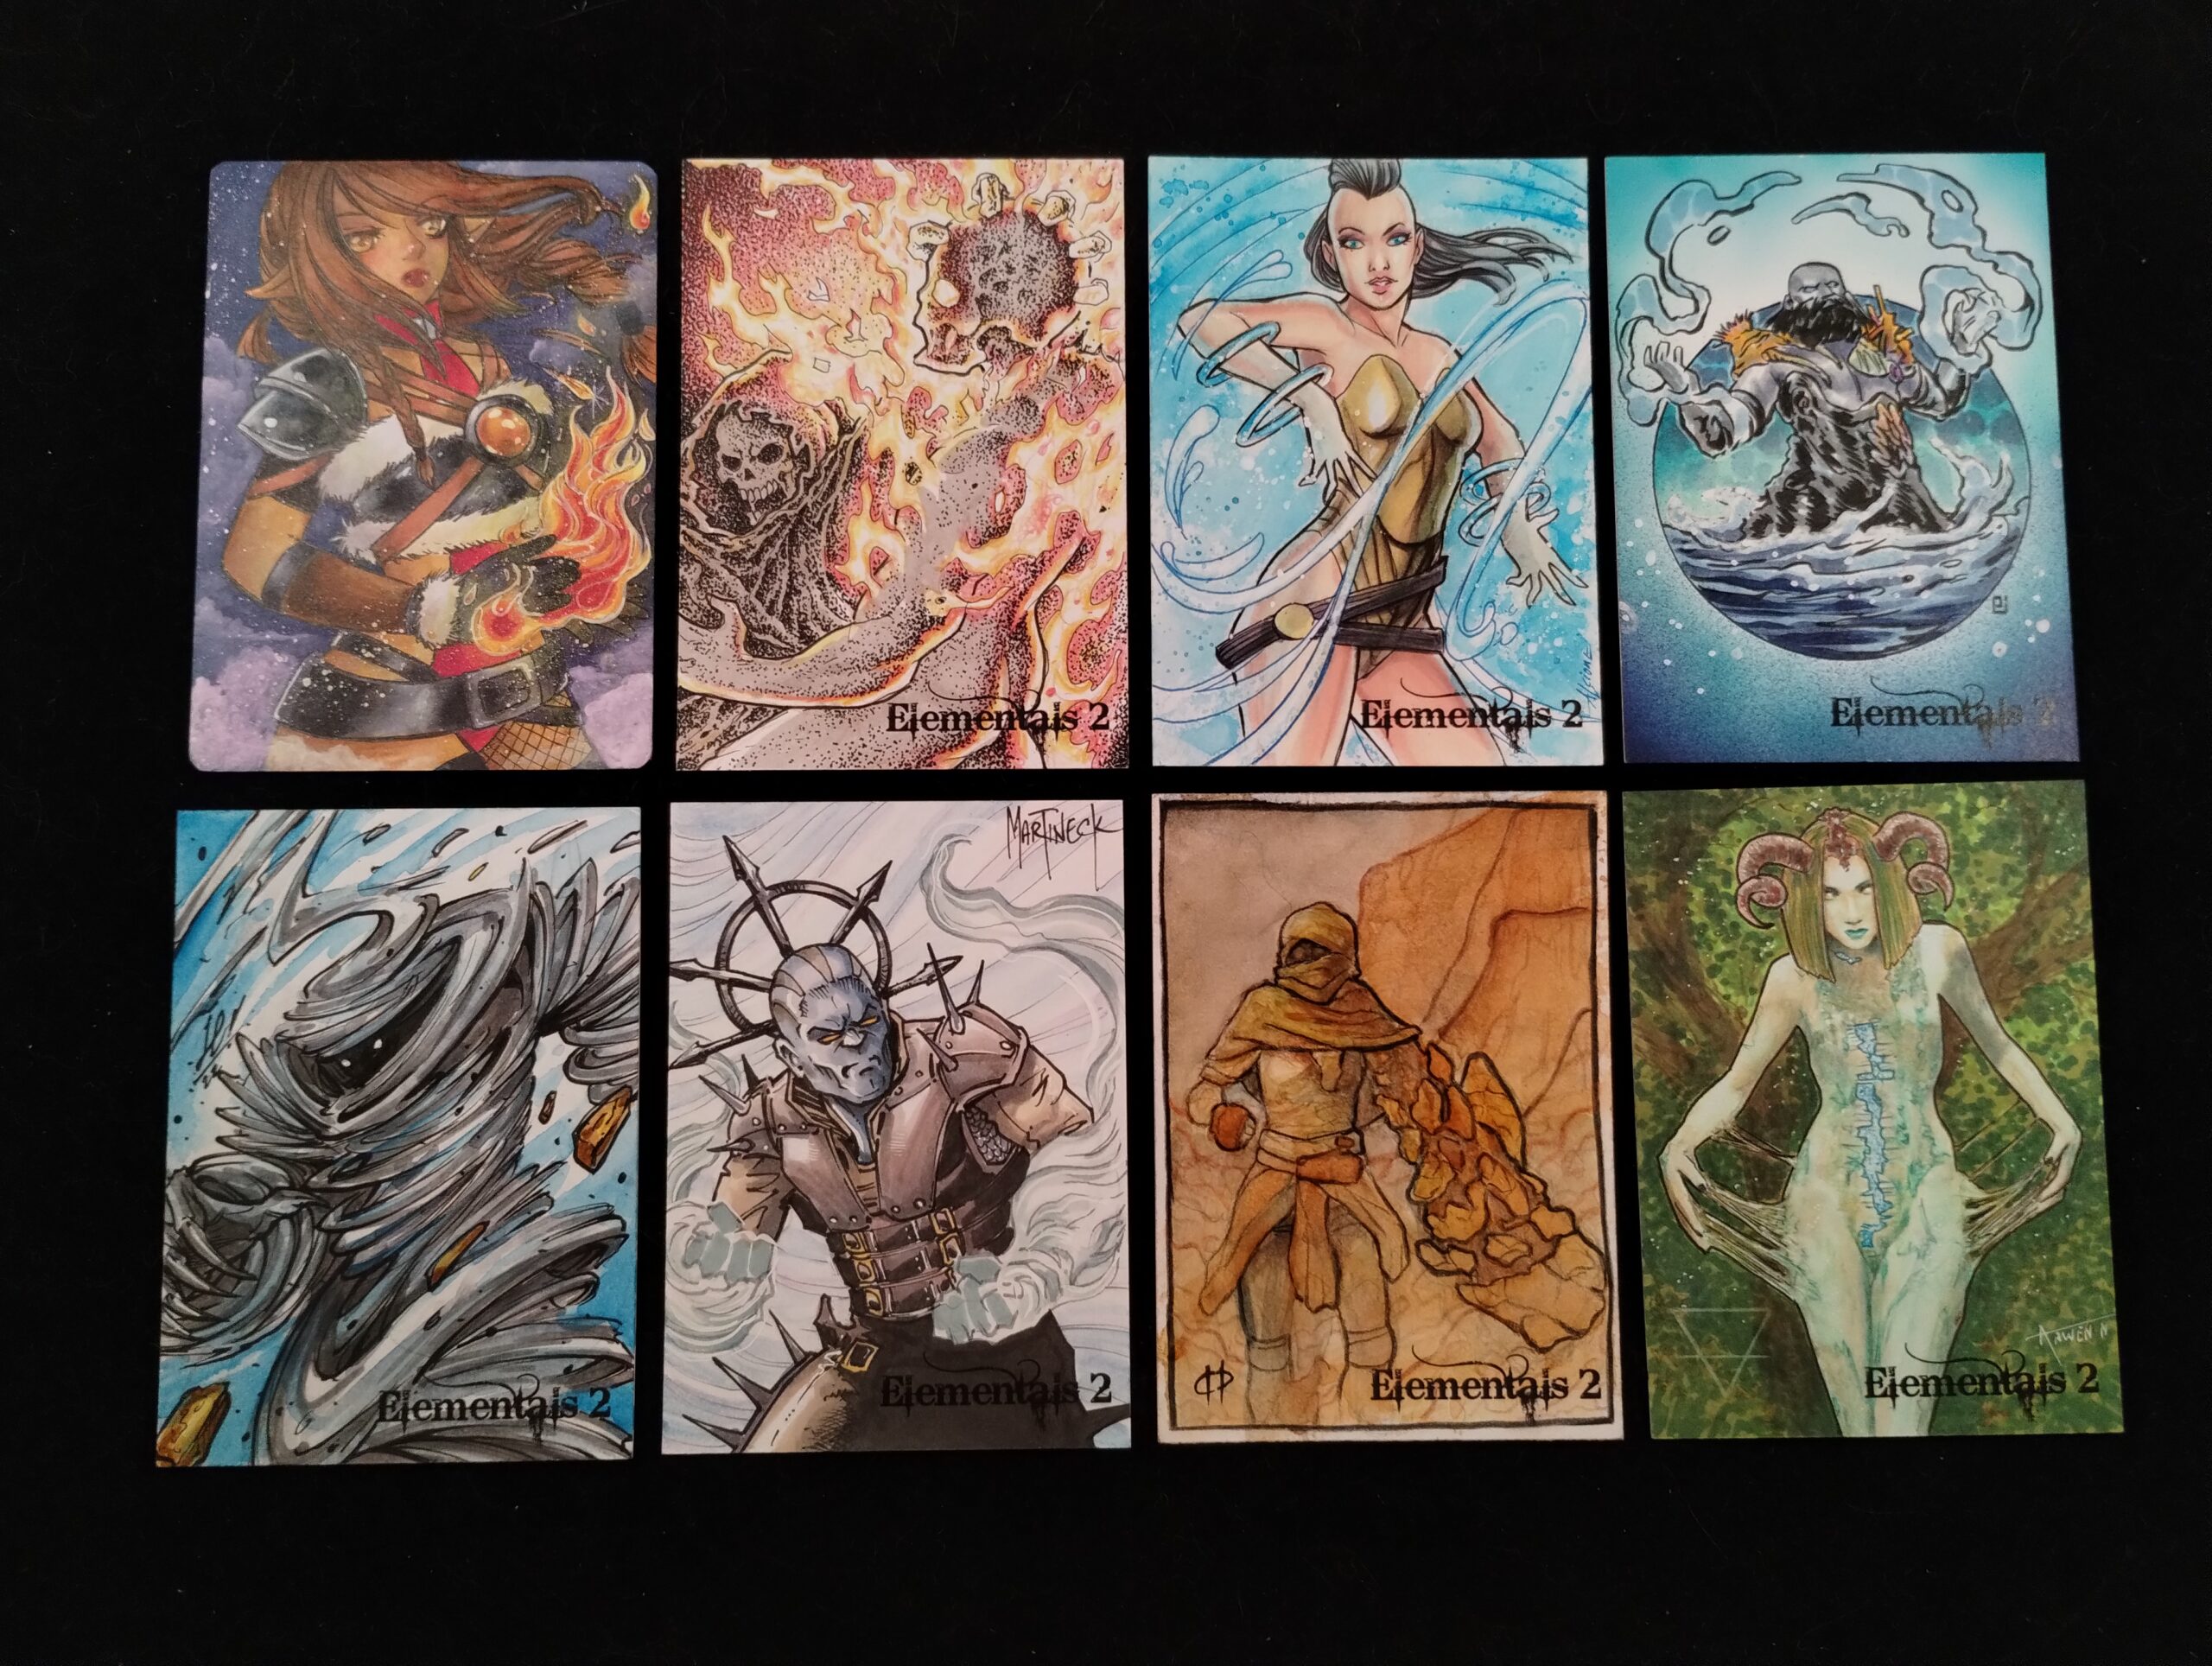 Eiight sketch cards arrayed in two rows